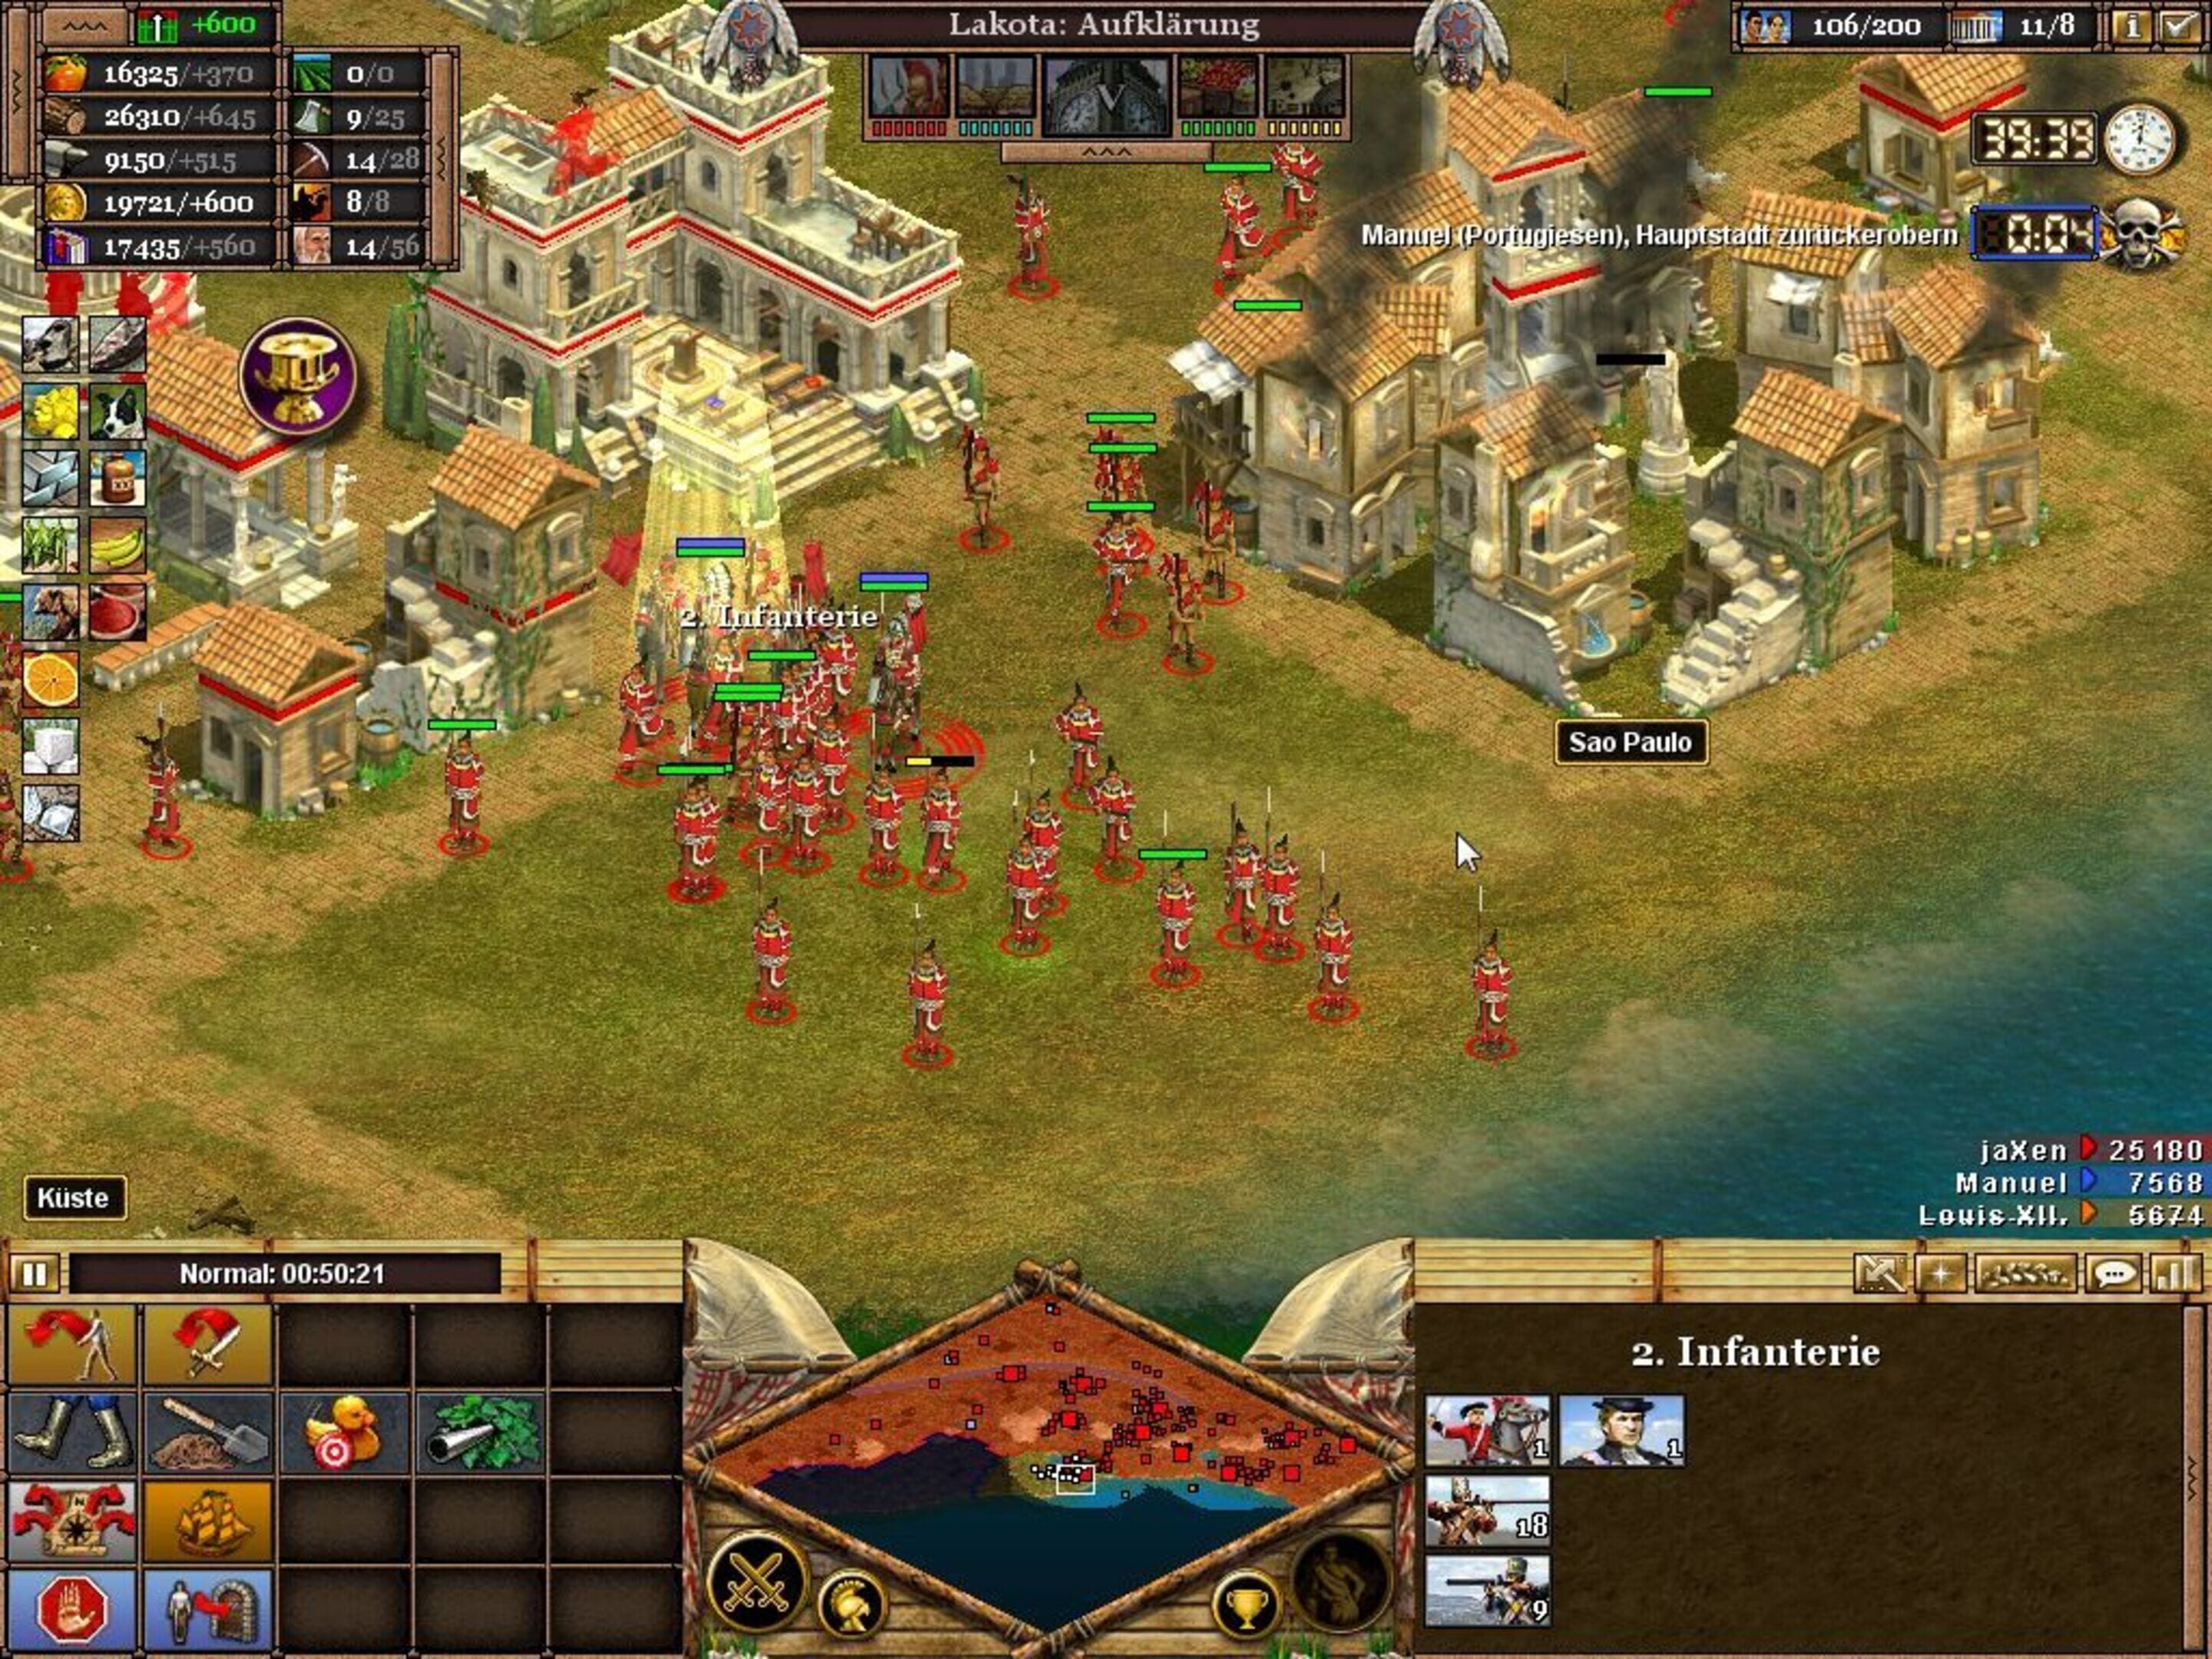 How to use cheats in Rise of Nations Thrones and Patriots 